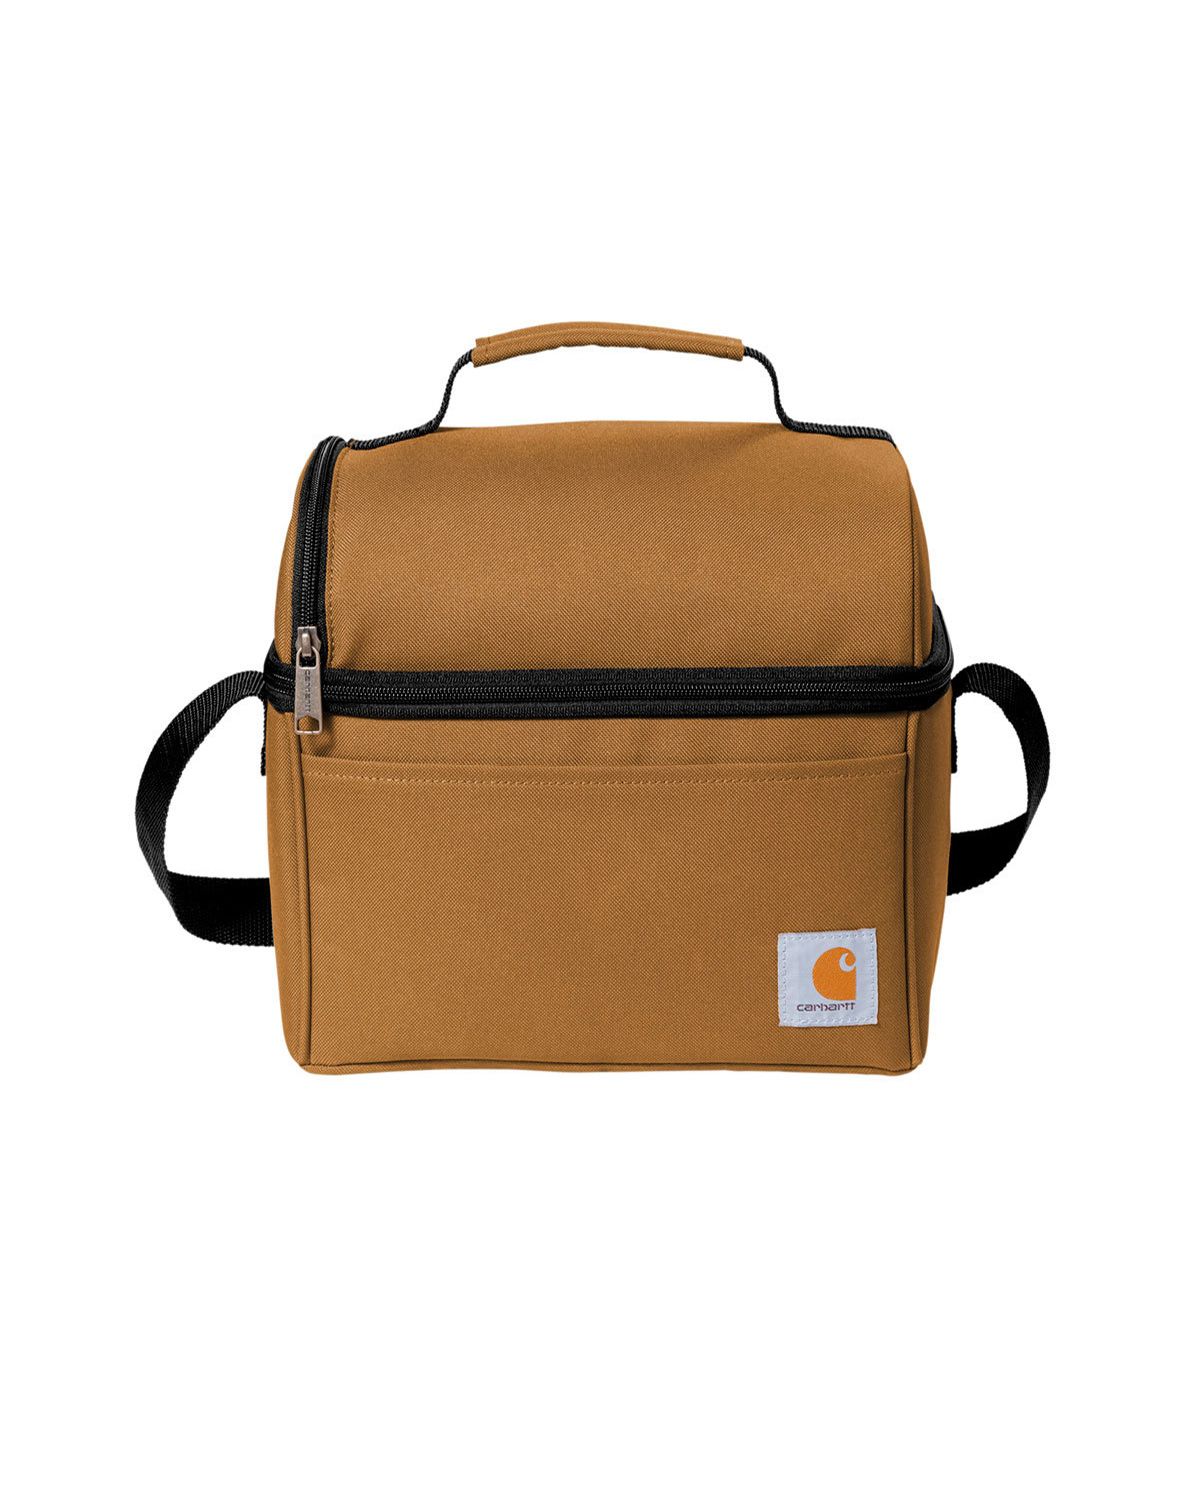 Ланч 6. Carhartt lunch Bag. Lunch Box Carhartt. Сумка Carhartt WIP lunch Box. Carhartt Insulated 12 can two compartment lunch Cooler.